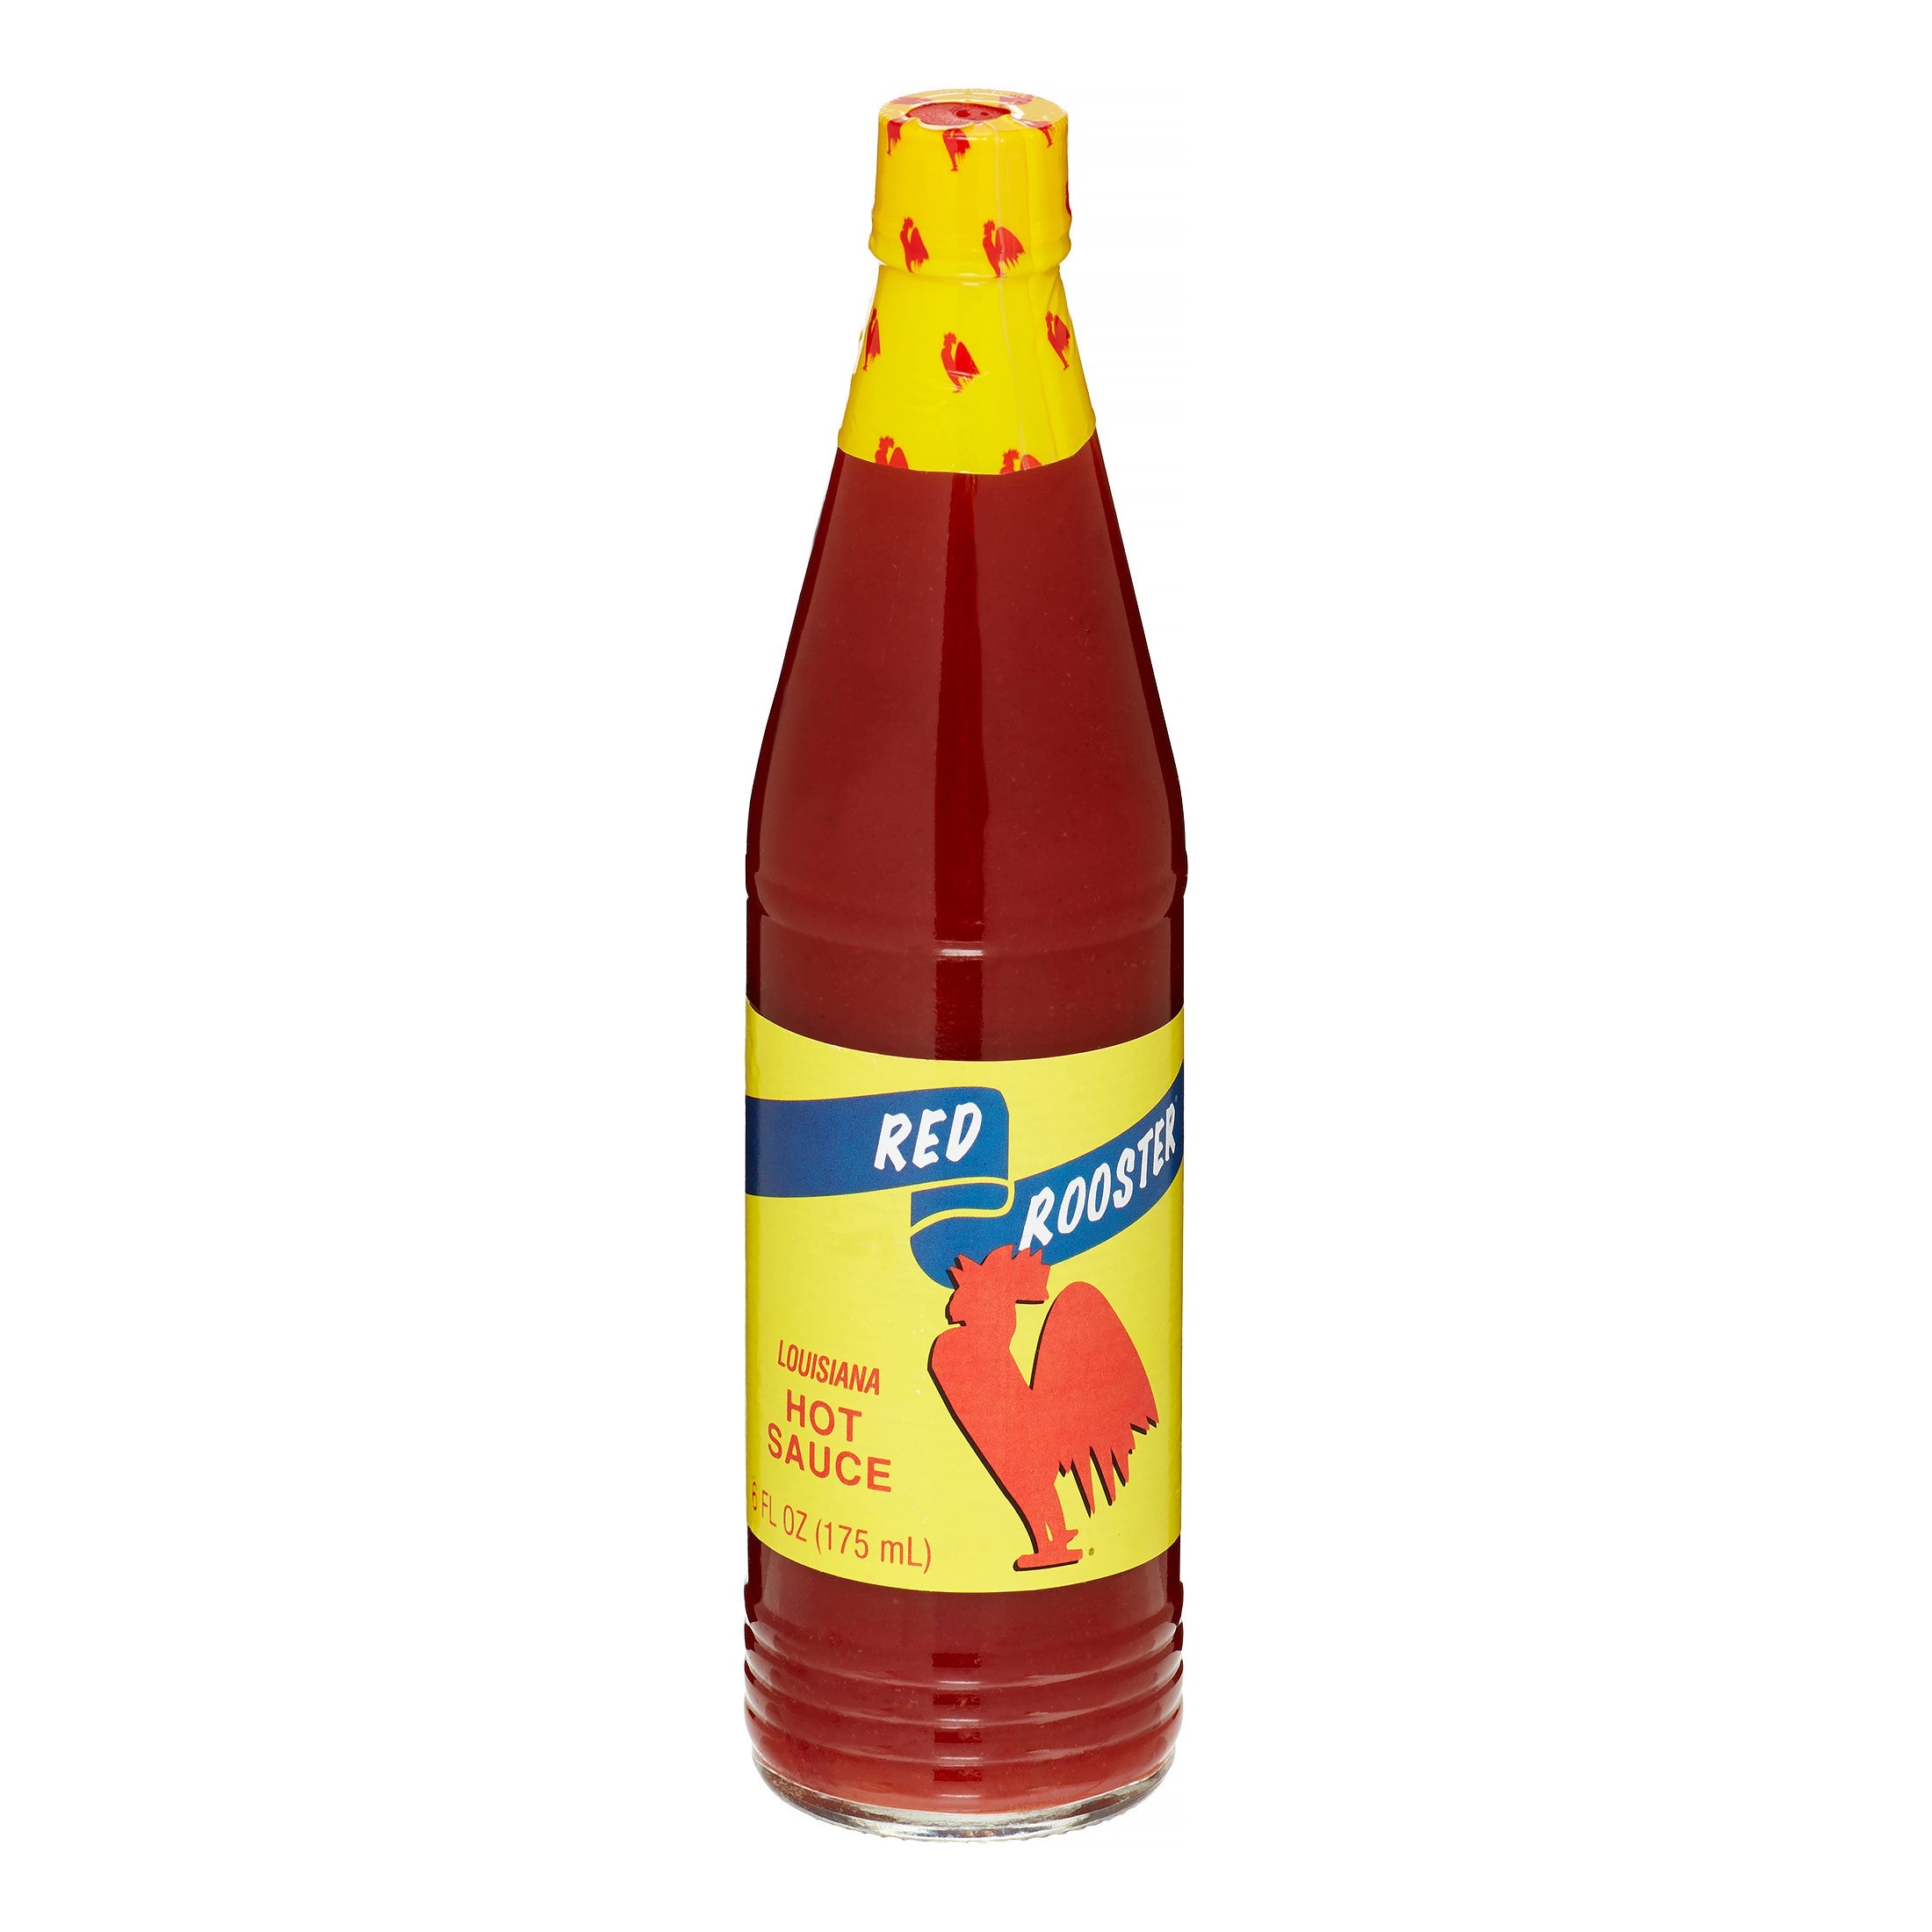 RED ROOSTER HOT SAUCE 6 OZ